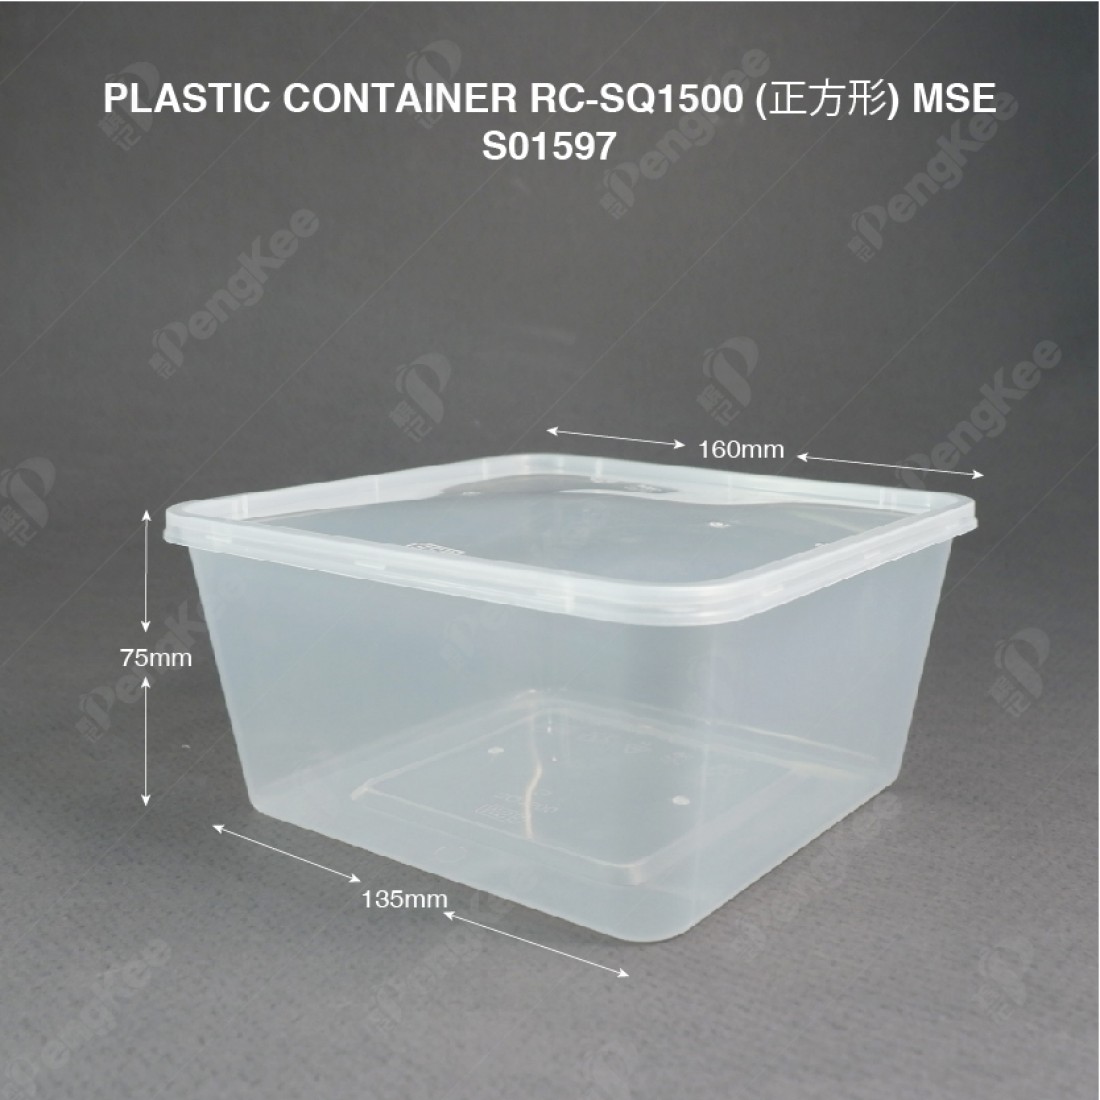 PLASTIC CONTAINER RC-SQ1500 (正方形) (50'S X 6PKT/CTN) MSE